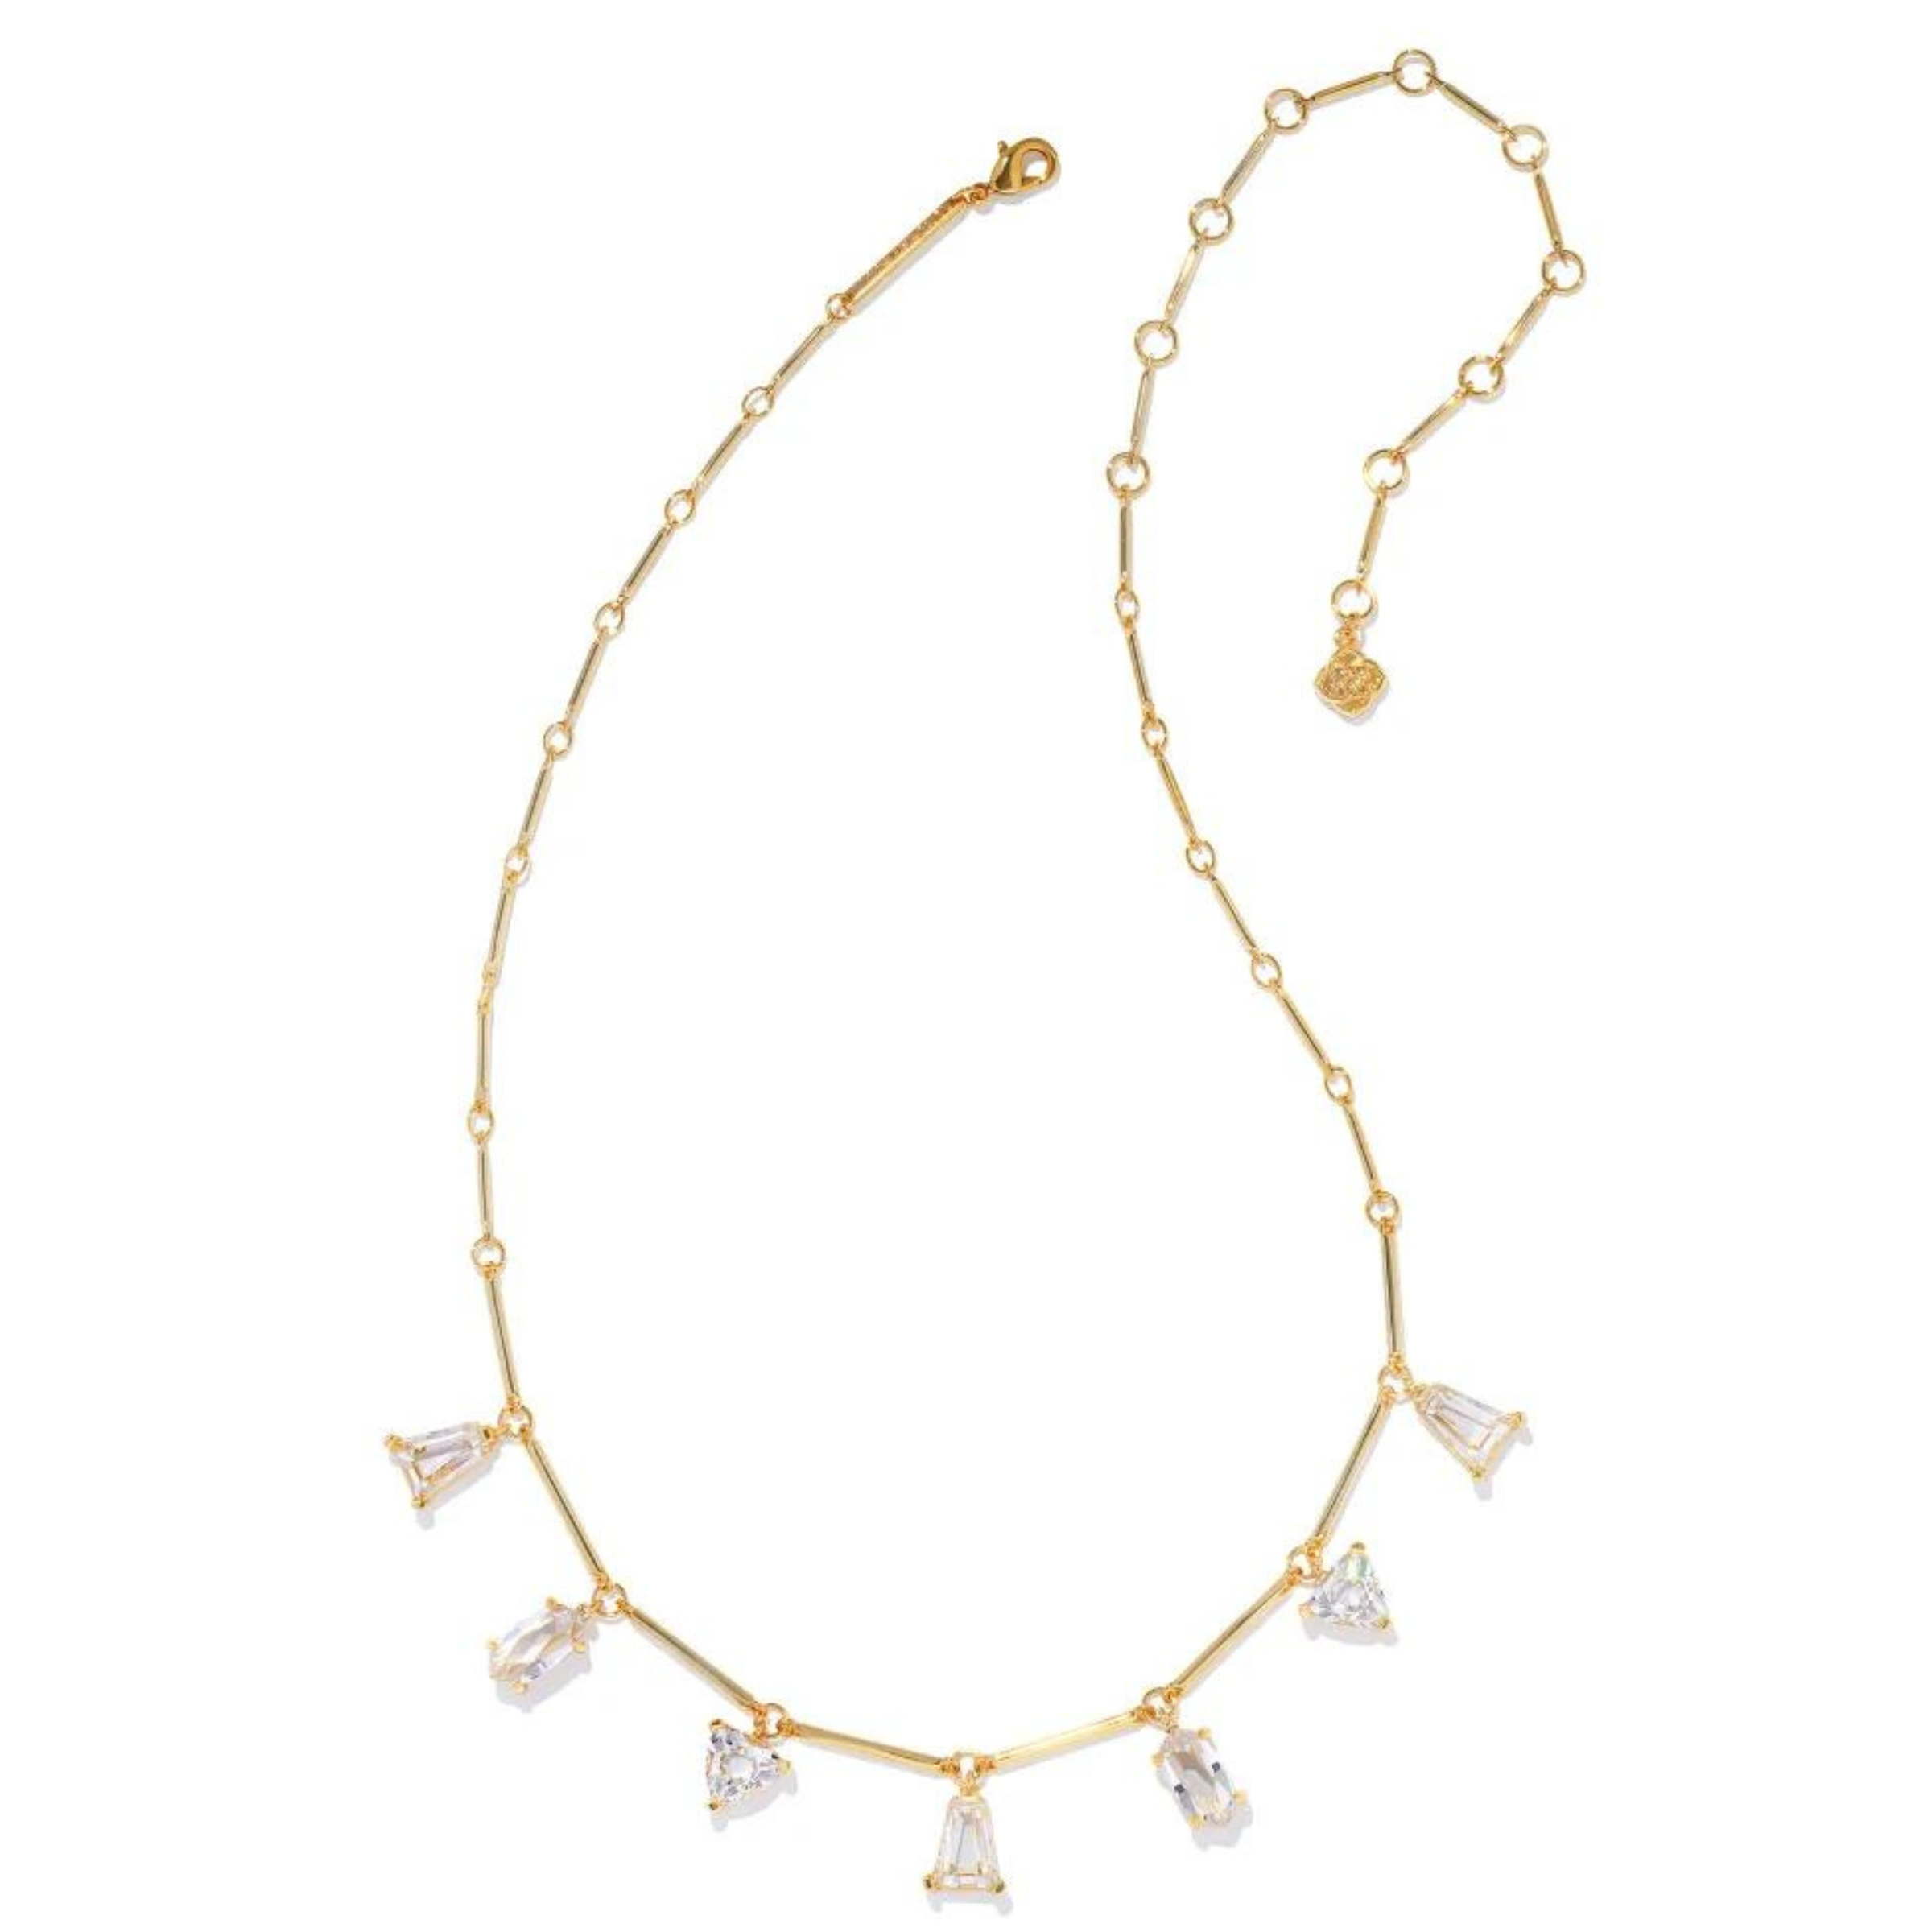 Gold chain necklace with white crystal charms in different shapes. This necklace is pictured on a white background.